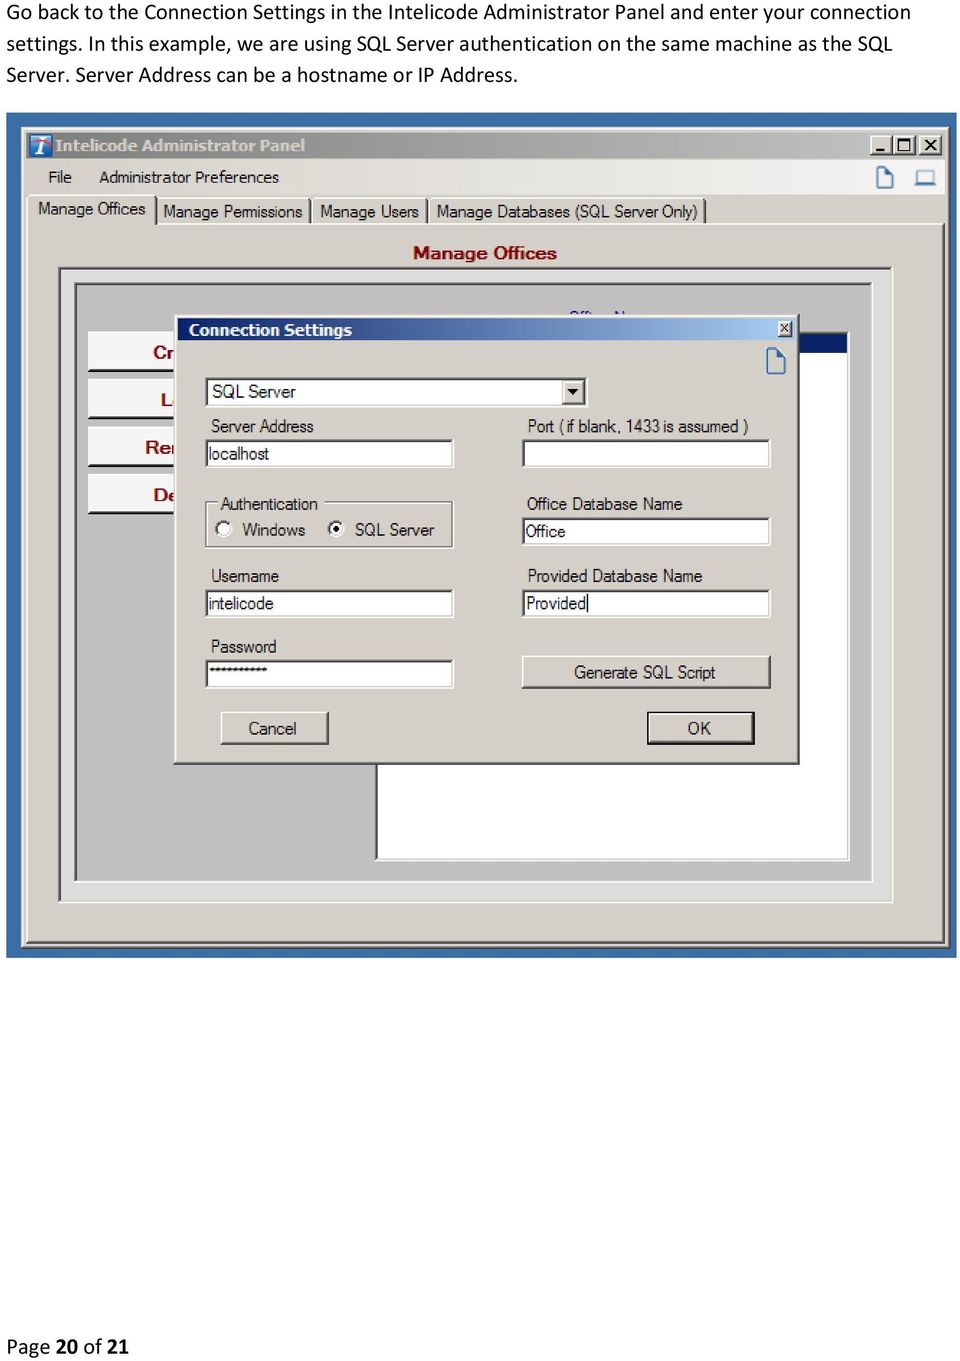 In this example, we are using SQL Server authentication on the